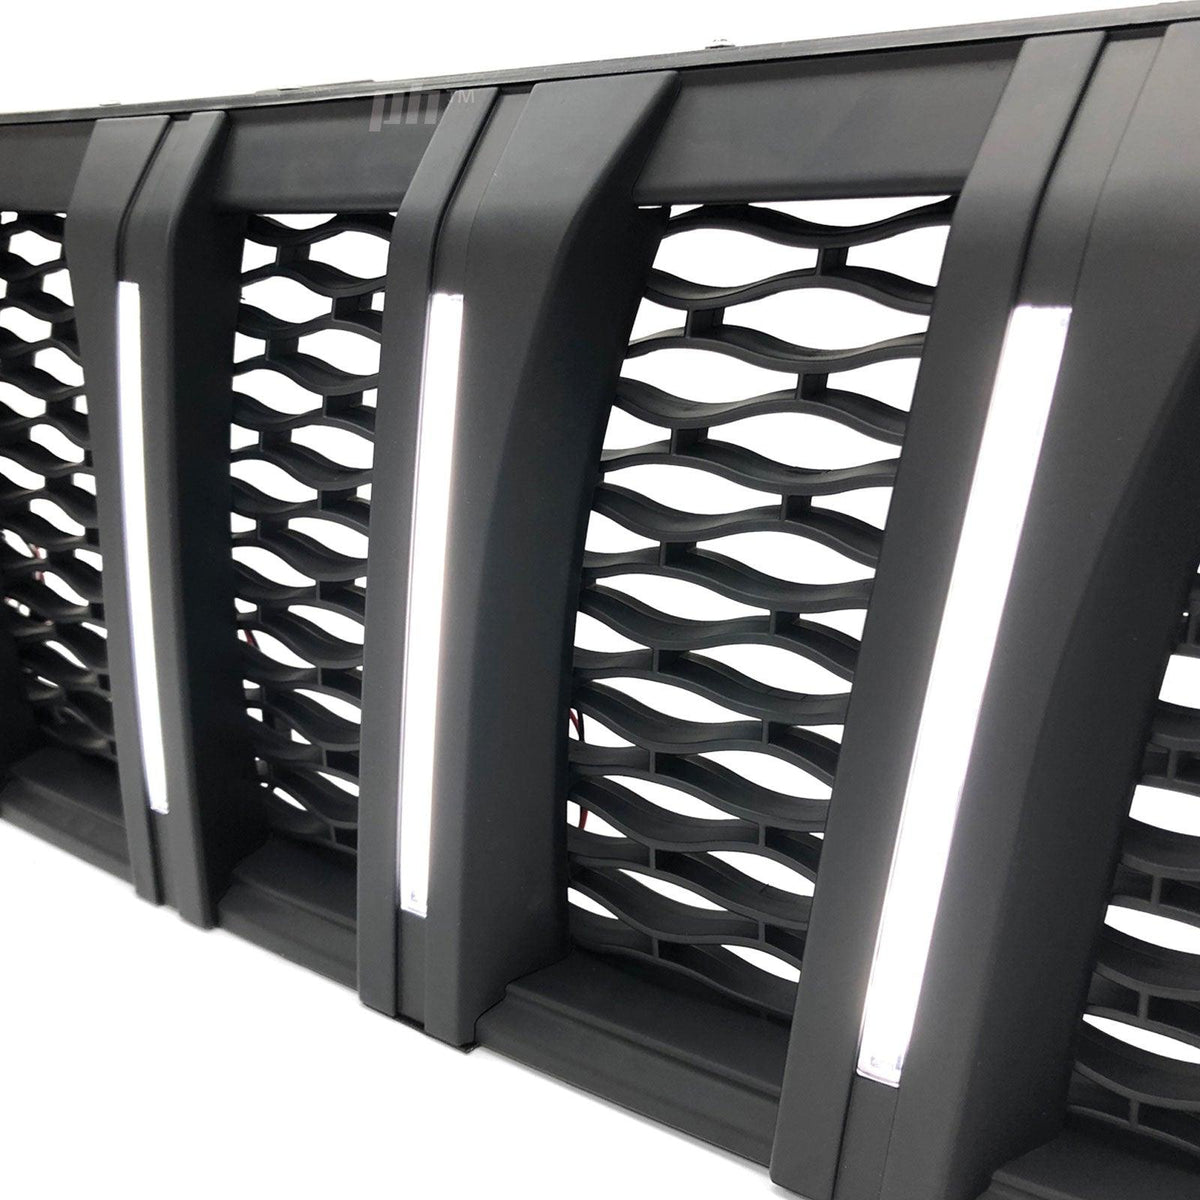 Panel House - Grill Black Edition Vertical LED DRL Style Fits Nissan Navara NP300 D23 15 - 2020 - 4X4OC™ | 4x4 Offroad Centre